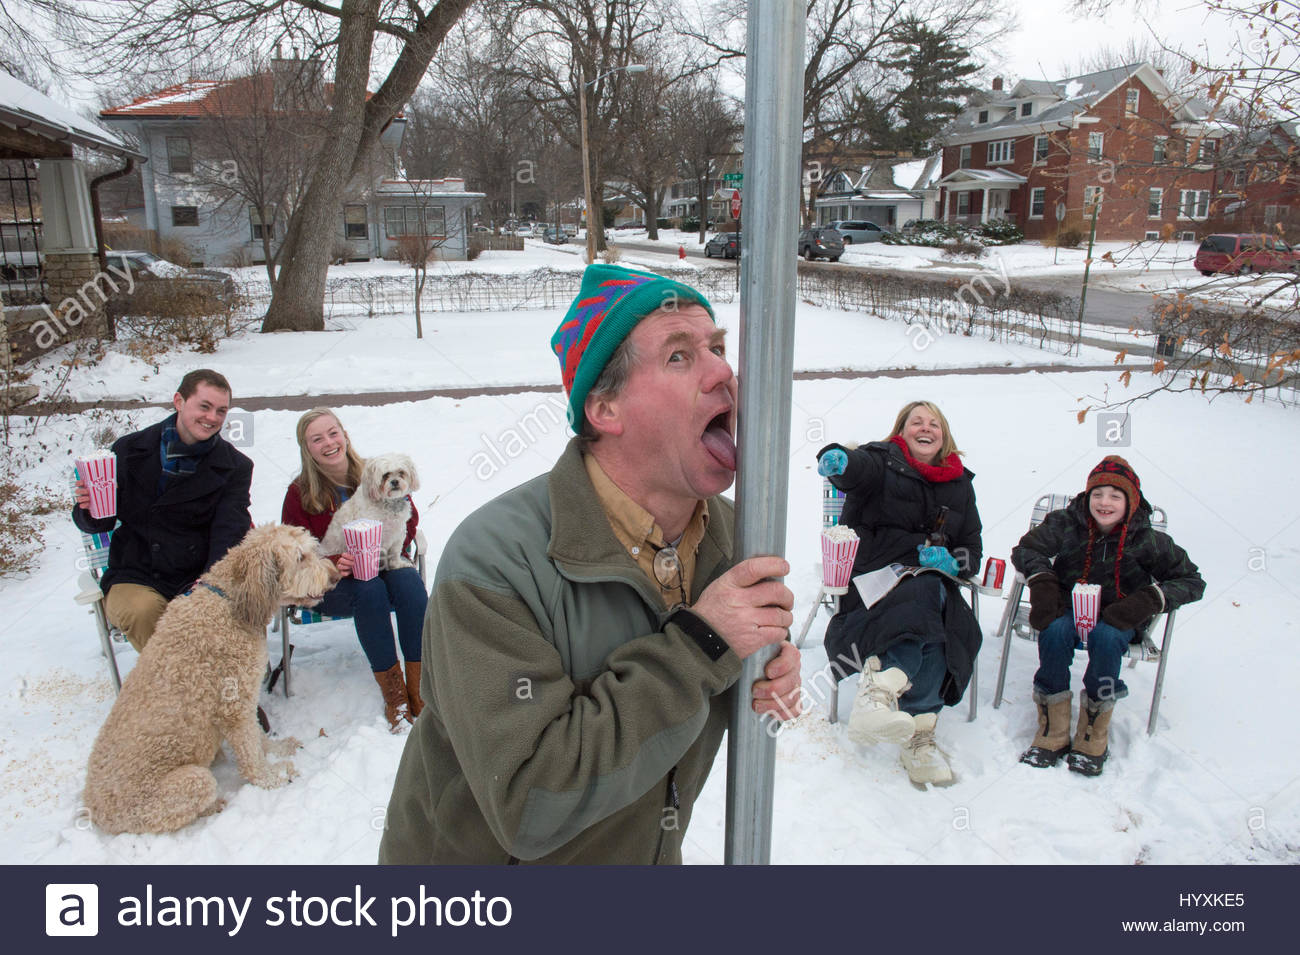 a-man-gets-his-tongue-stuck-to-a-pole-while-his-family-laughs-in-the-HYXKE5.jpg